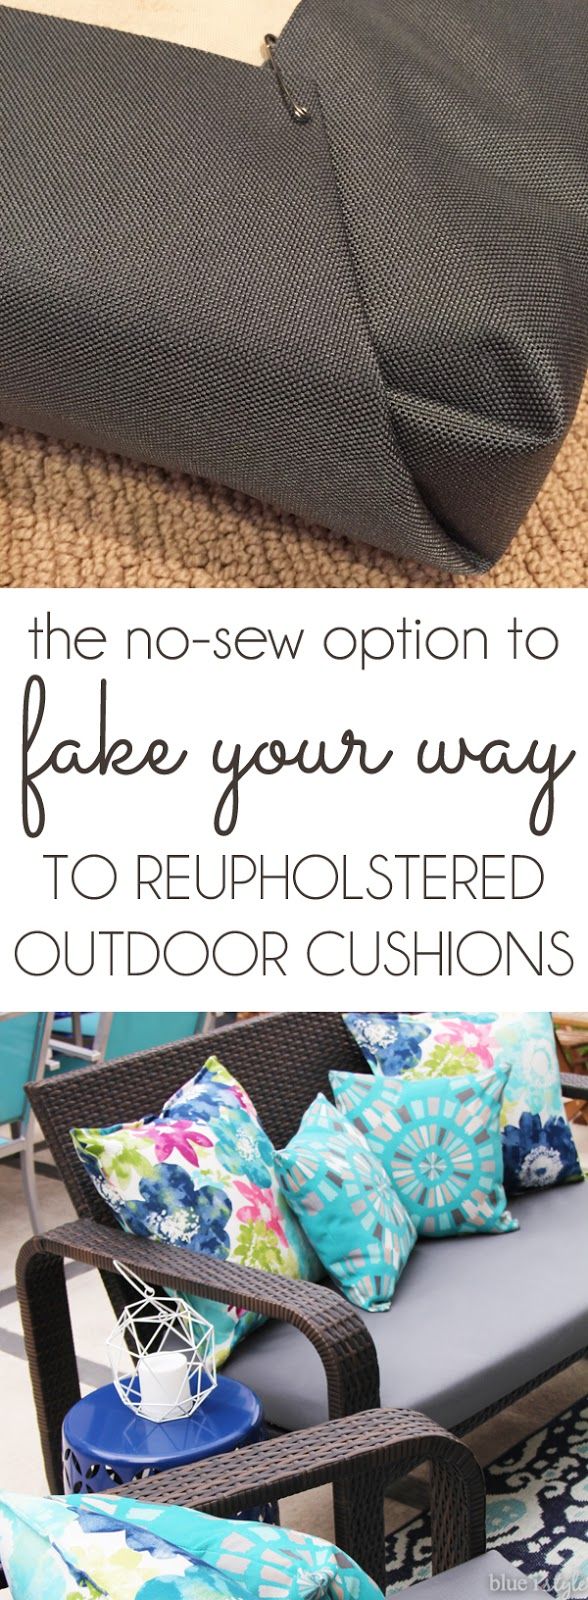 The No-Sew Way to Reupholster Outdoor Cushions